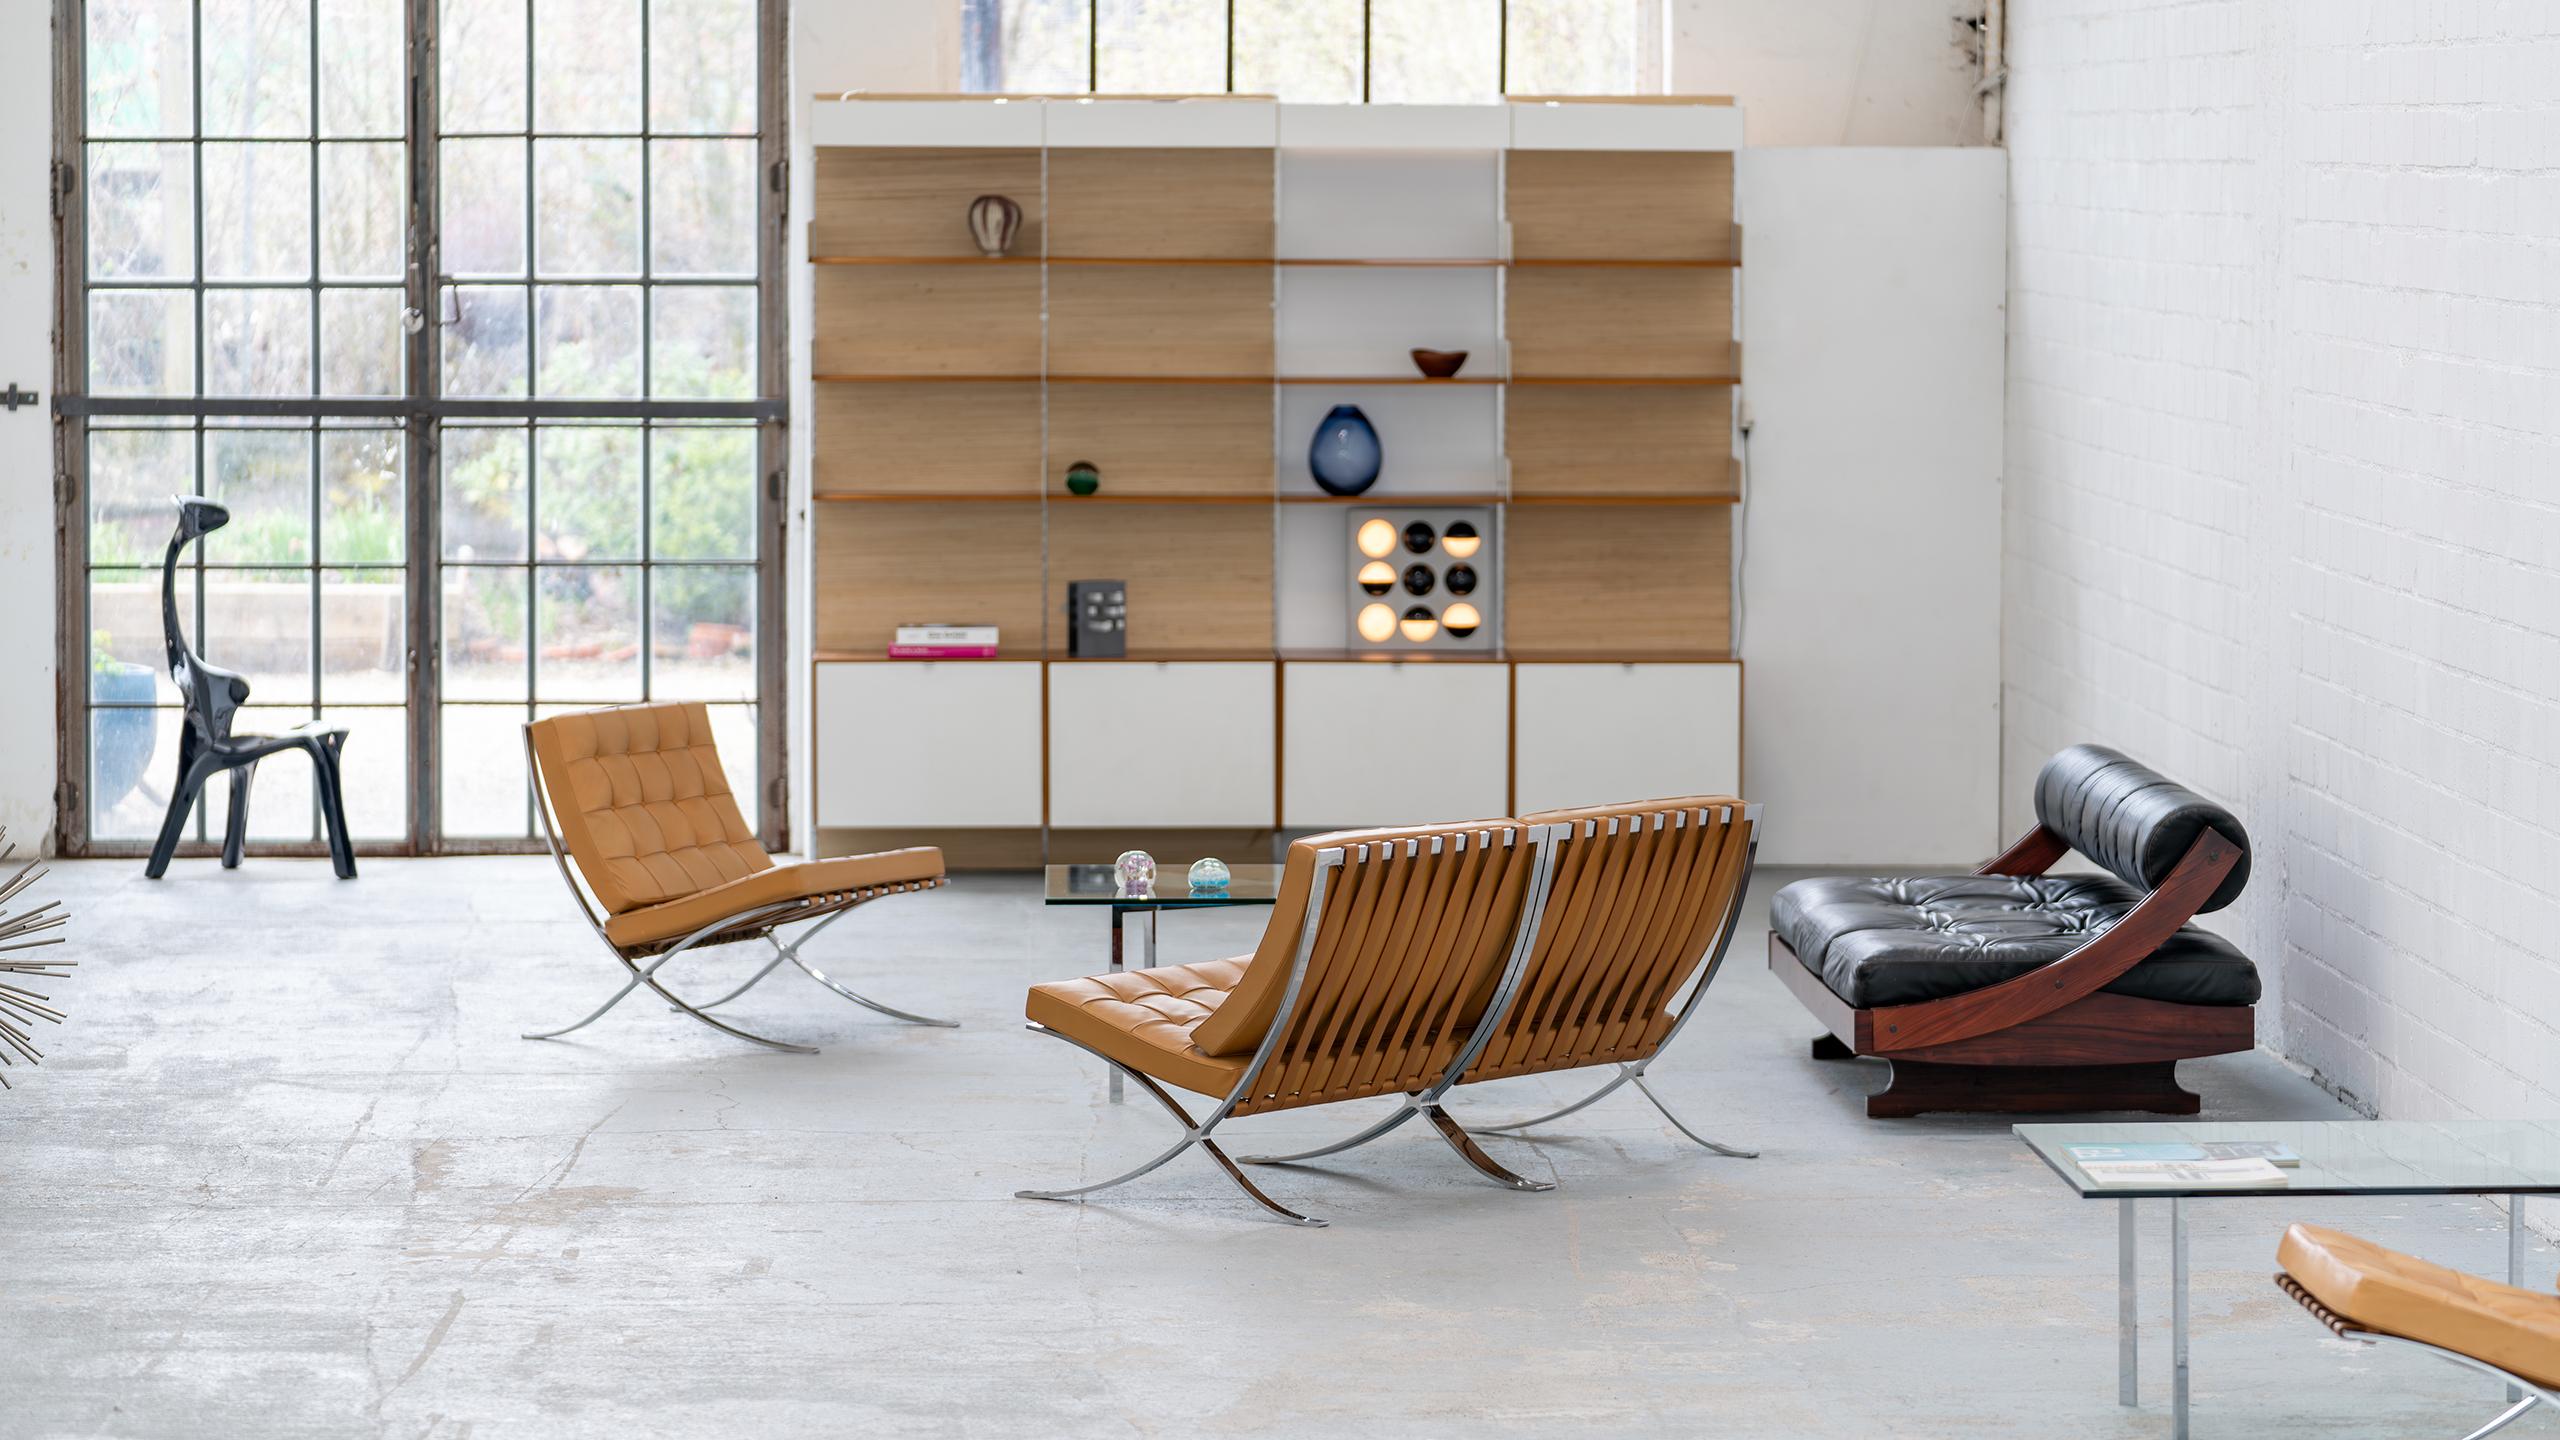 Knoll Barcelona Coffee Table - Barcelona Coffee Table by Ludwig Mies van der Rohe.

The so-called Barcelona Coffee Table by Knoll International was originally designed by Ludwig Mies van der Rohe not for the German Pavilion in Barcelona, but in 1929